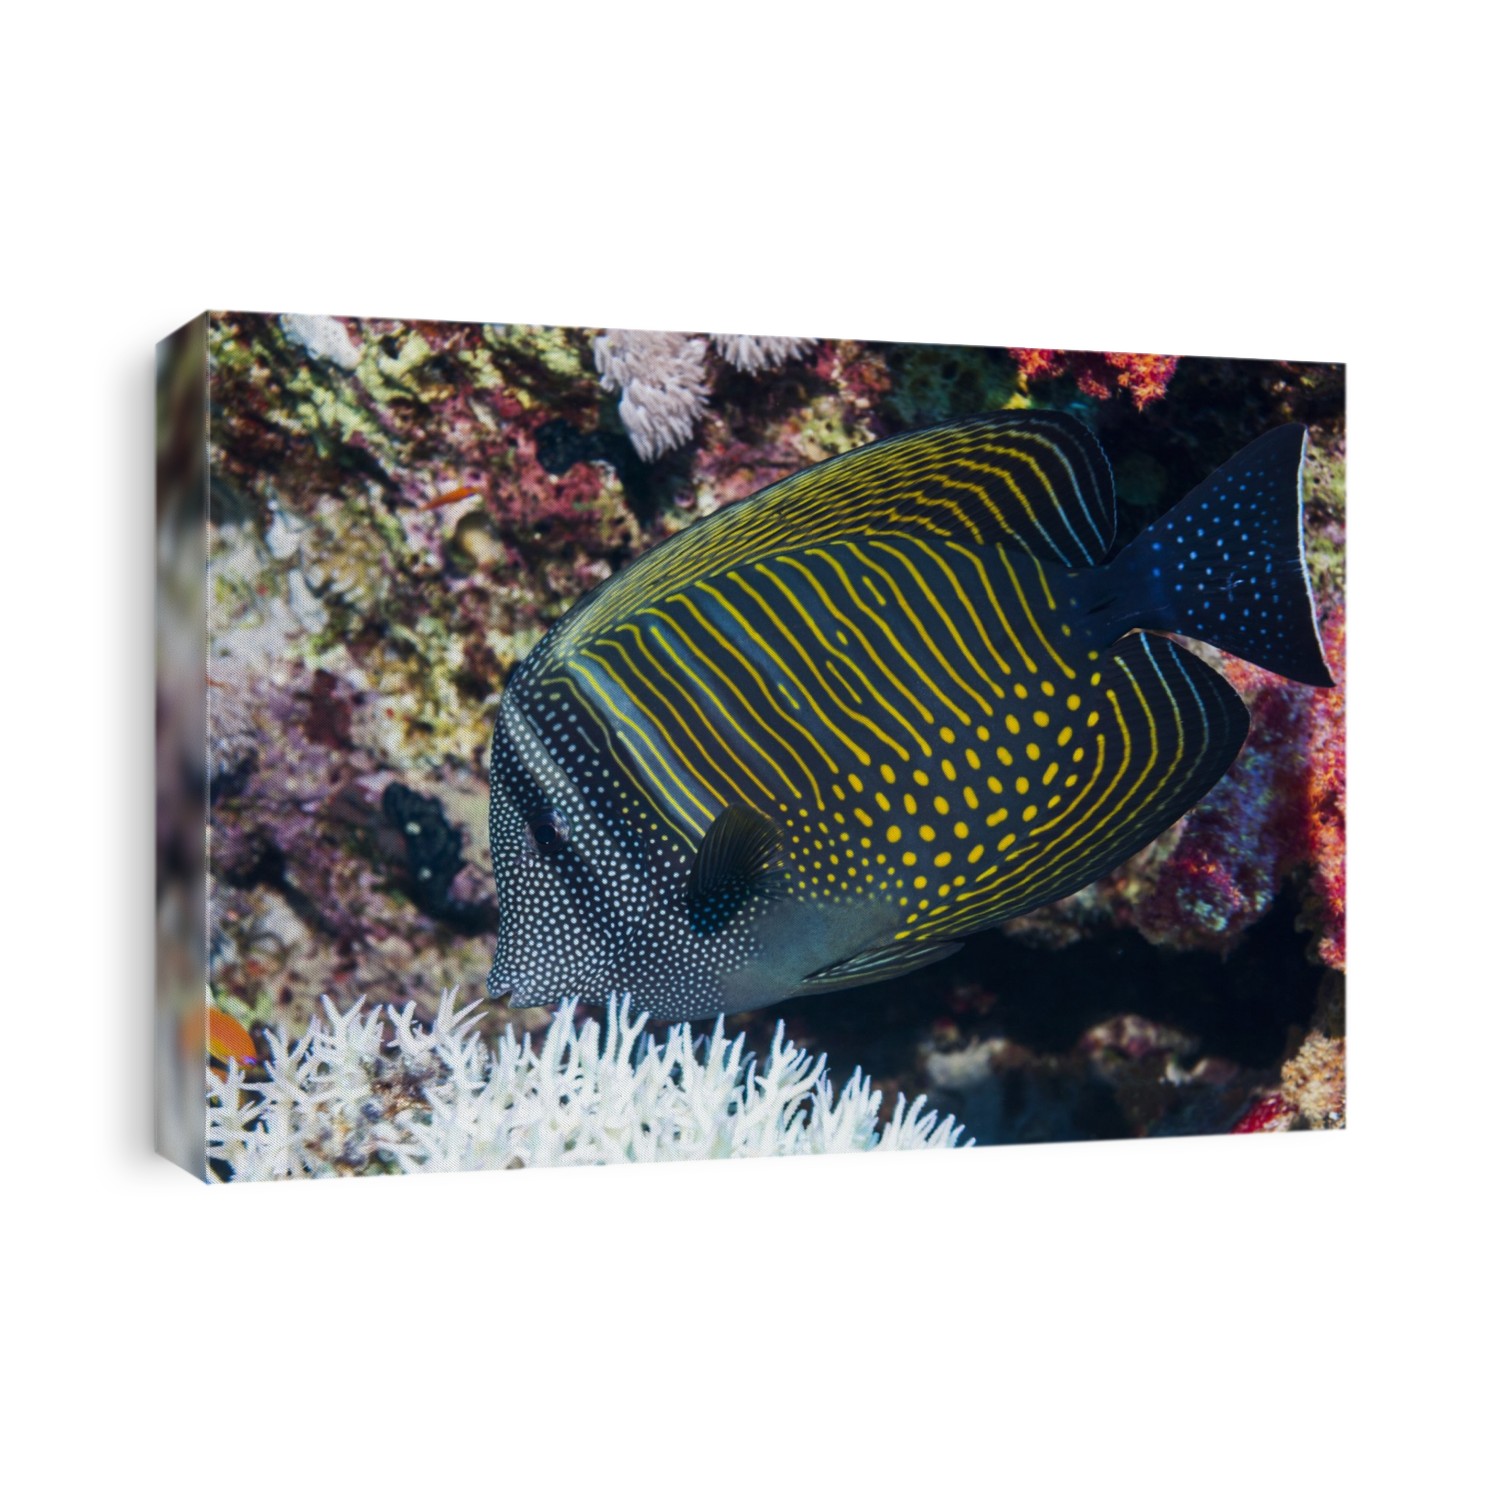 Red Sea sailfin tang or Desjardin's sailfin tang (Zebrasoma desjardinii). Adults are usually found in pairs, while juveniles are solitary. Photographed in Egypt, Red Sea.